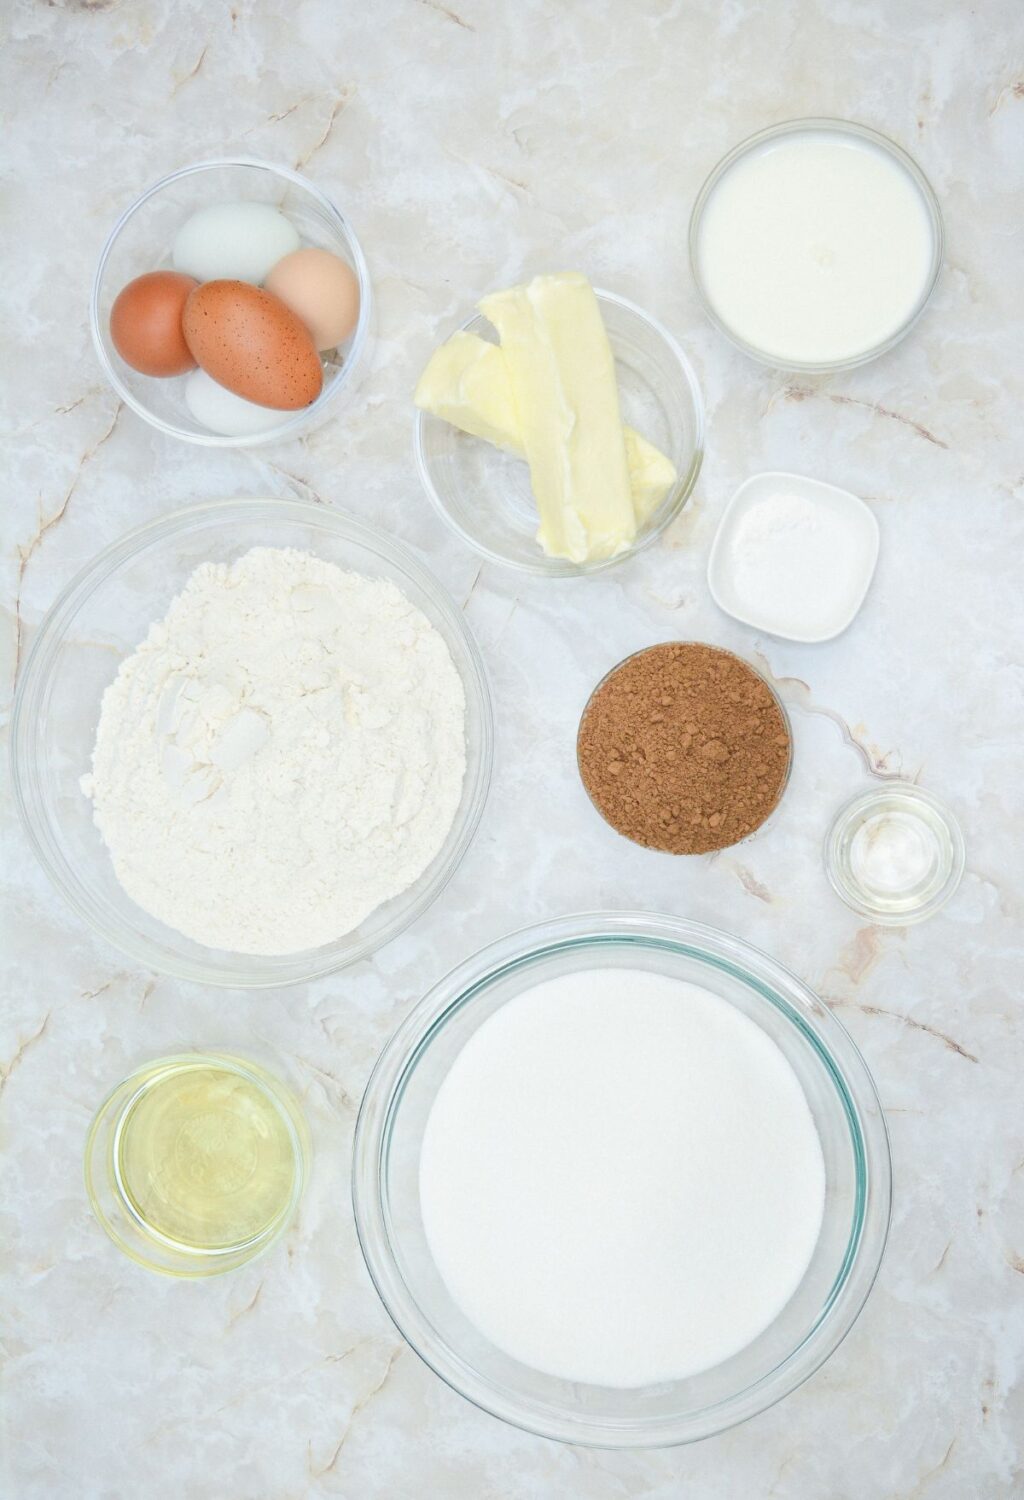 The ingredients for a cake including eggs, flour, sugar and butter.